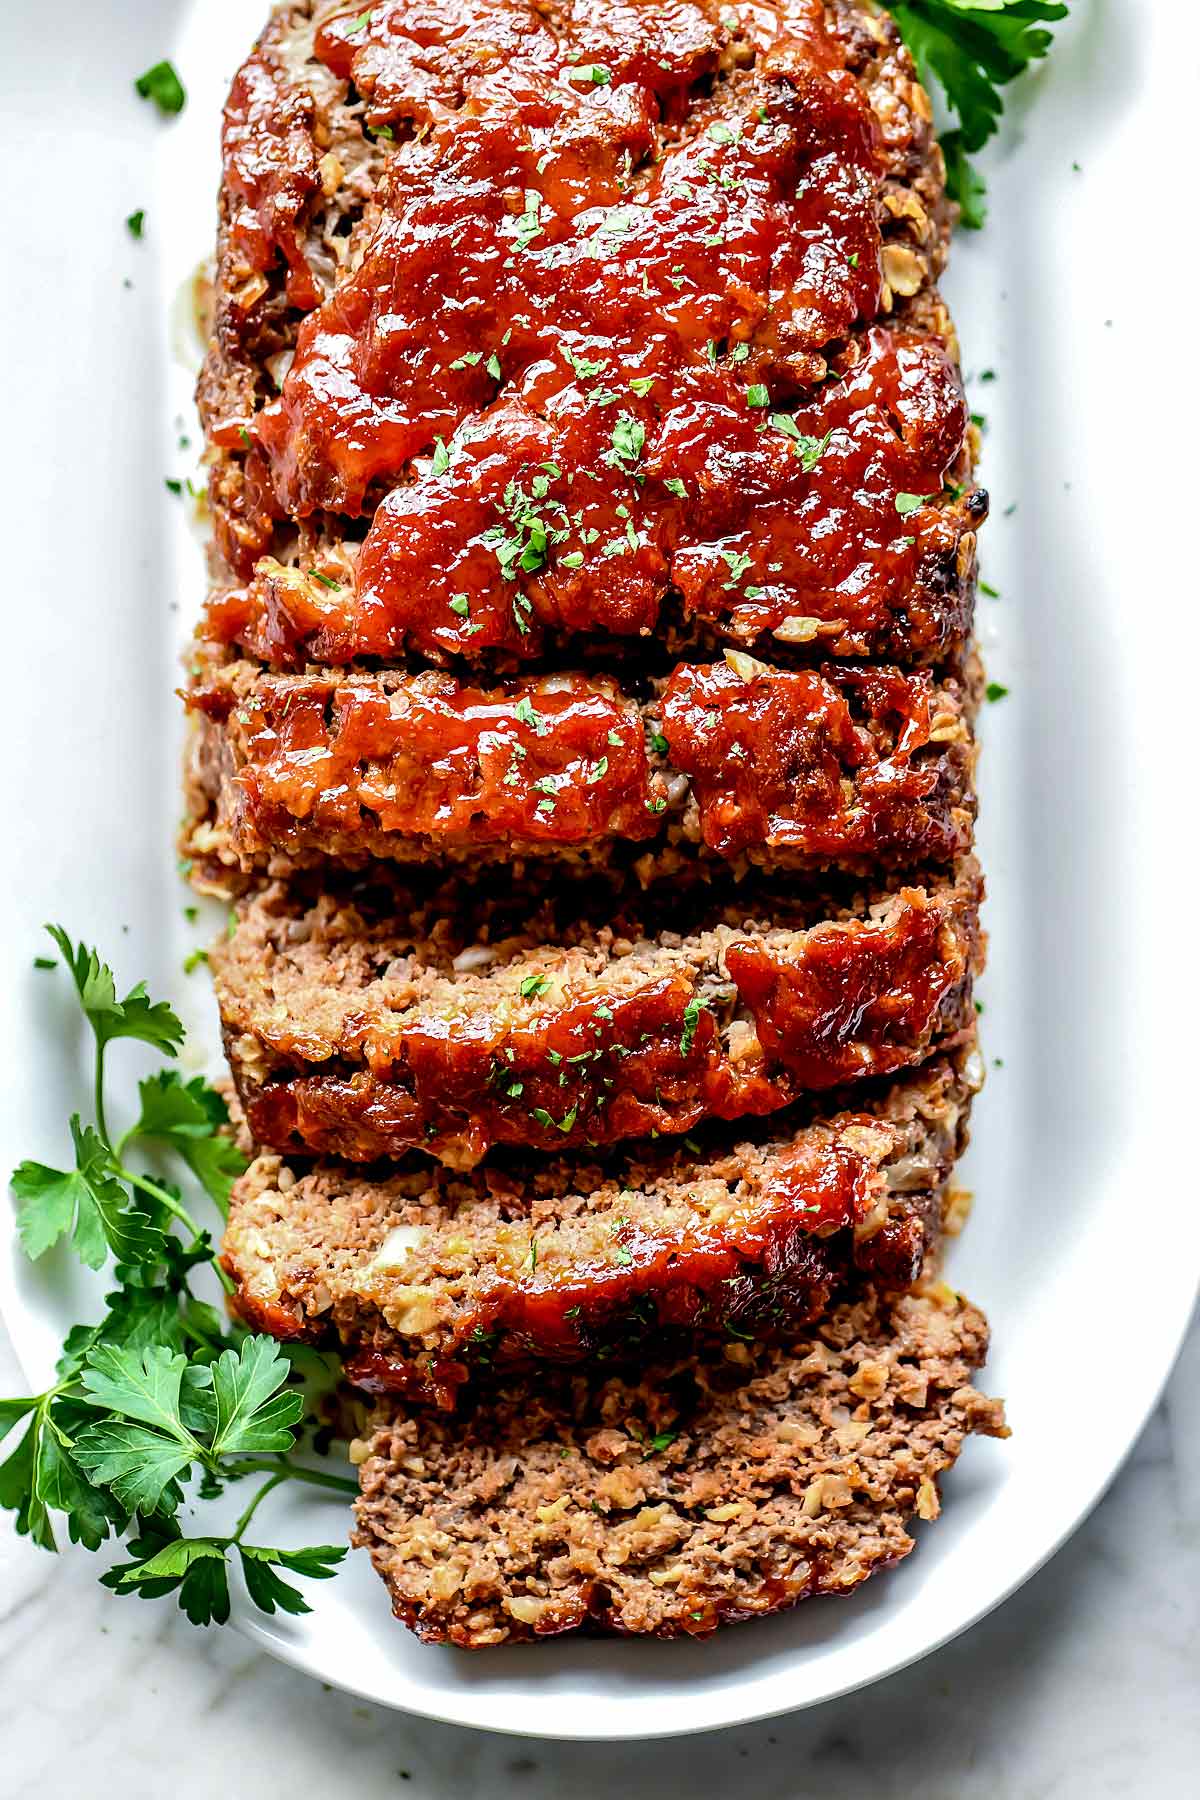 How To Make The Best Easy Meatloaf Recipe